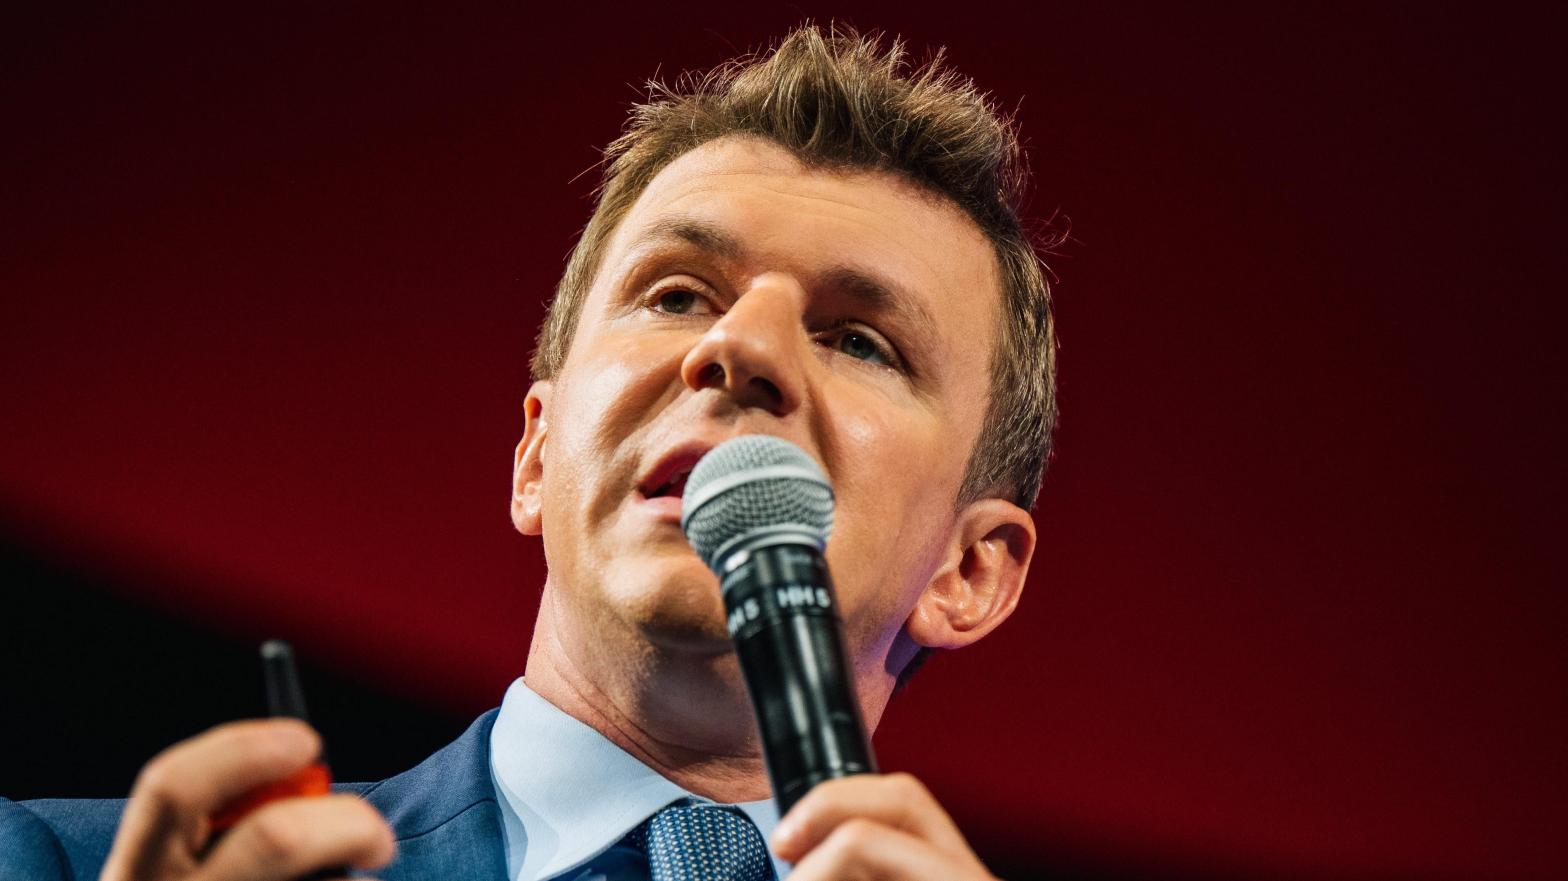 James O'Keefe founded Project Veritas in 2010. (Image: Brandon Bell, Getty Images)